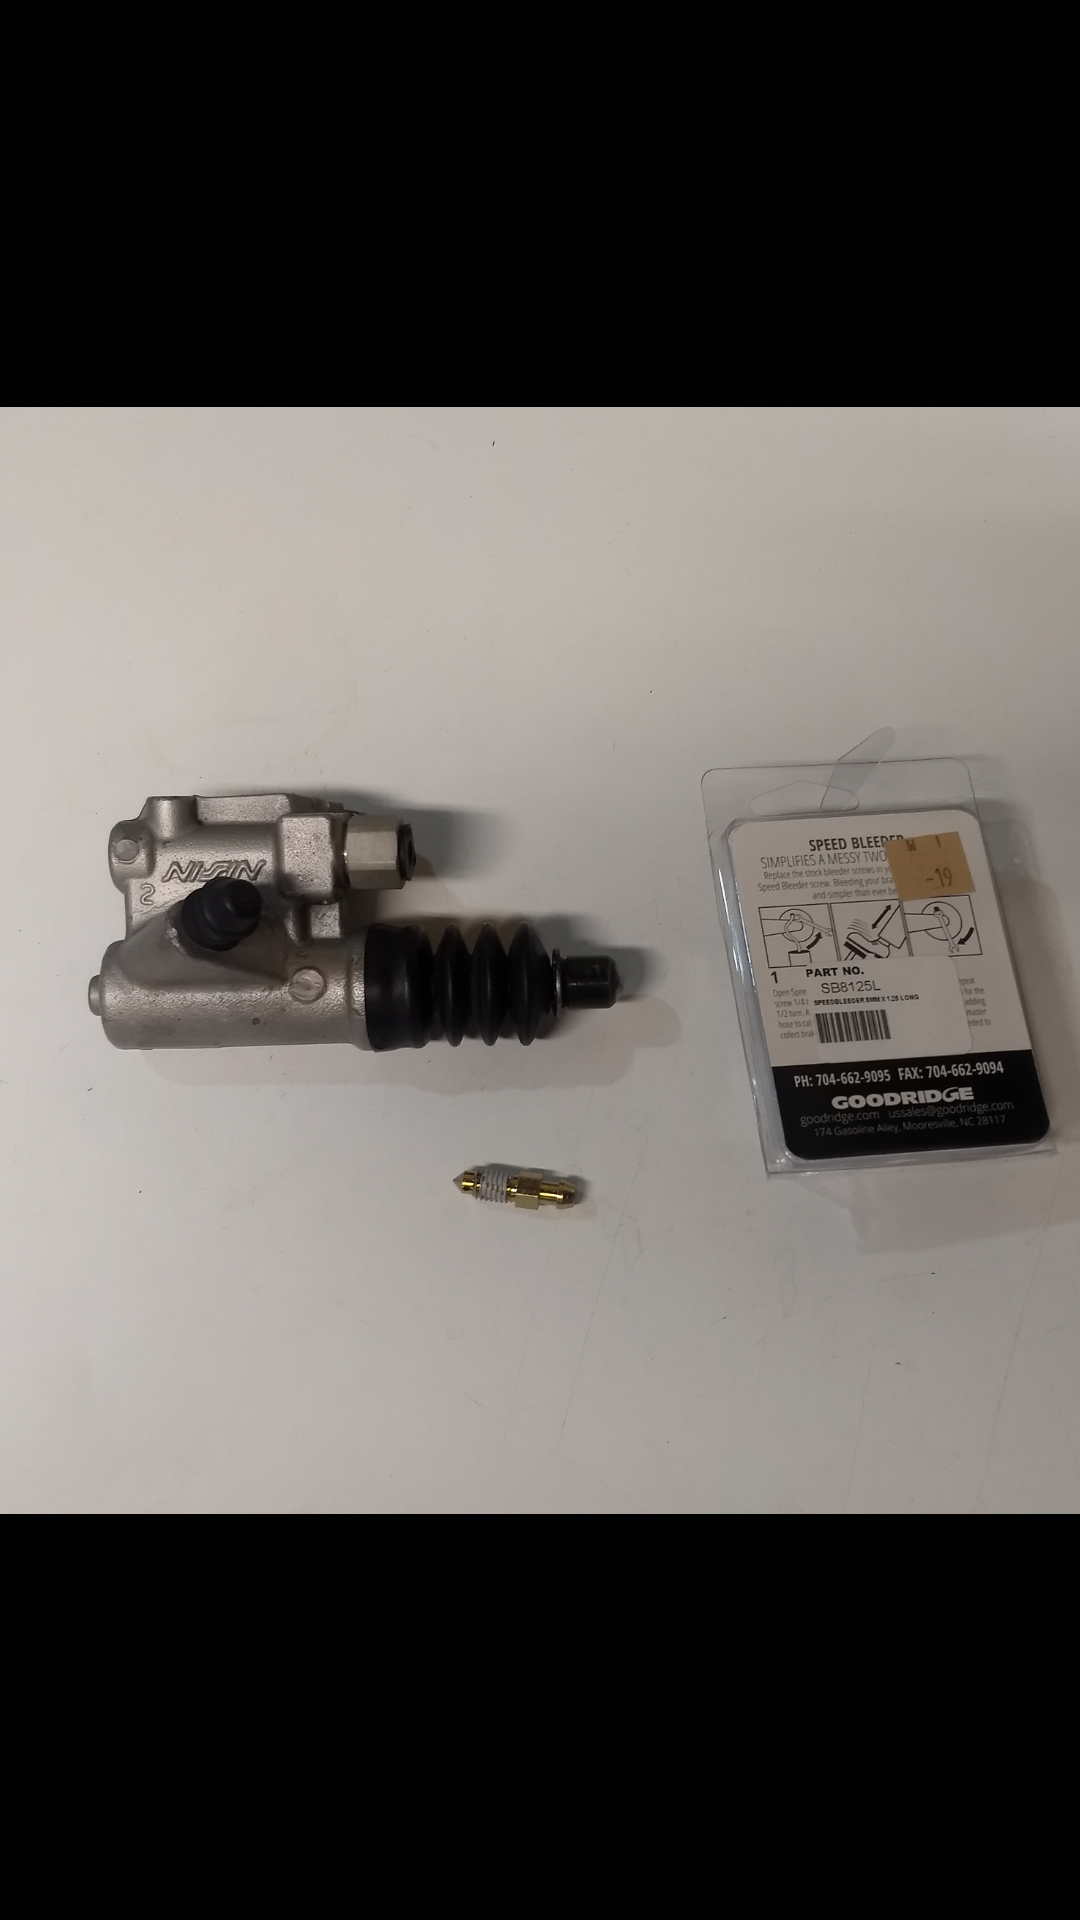 Drivetrain - FS: TL slave cylinder with removed delay valve - Used - 2007 to 2008 Acura TL - Citrus Heights, CA 95610, United States